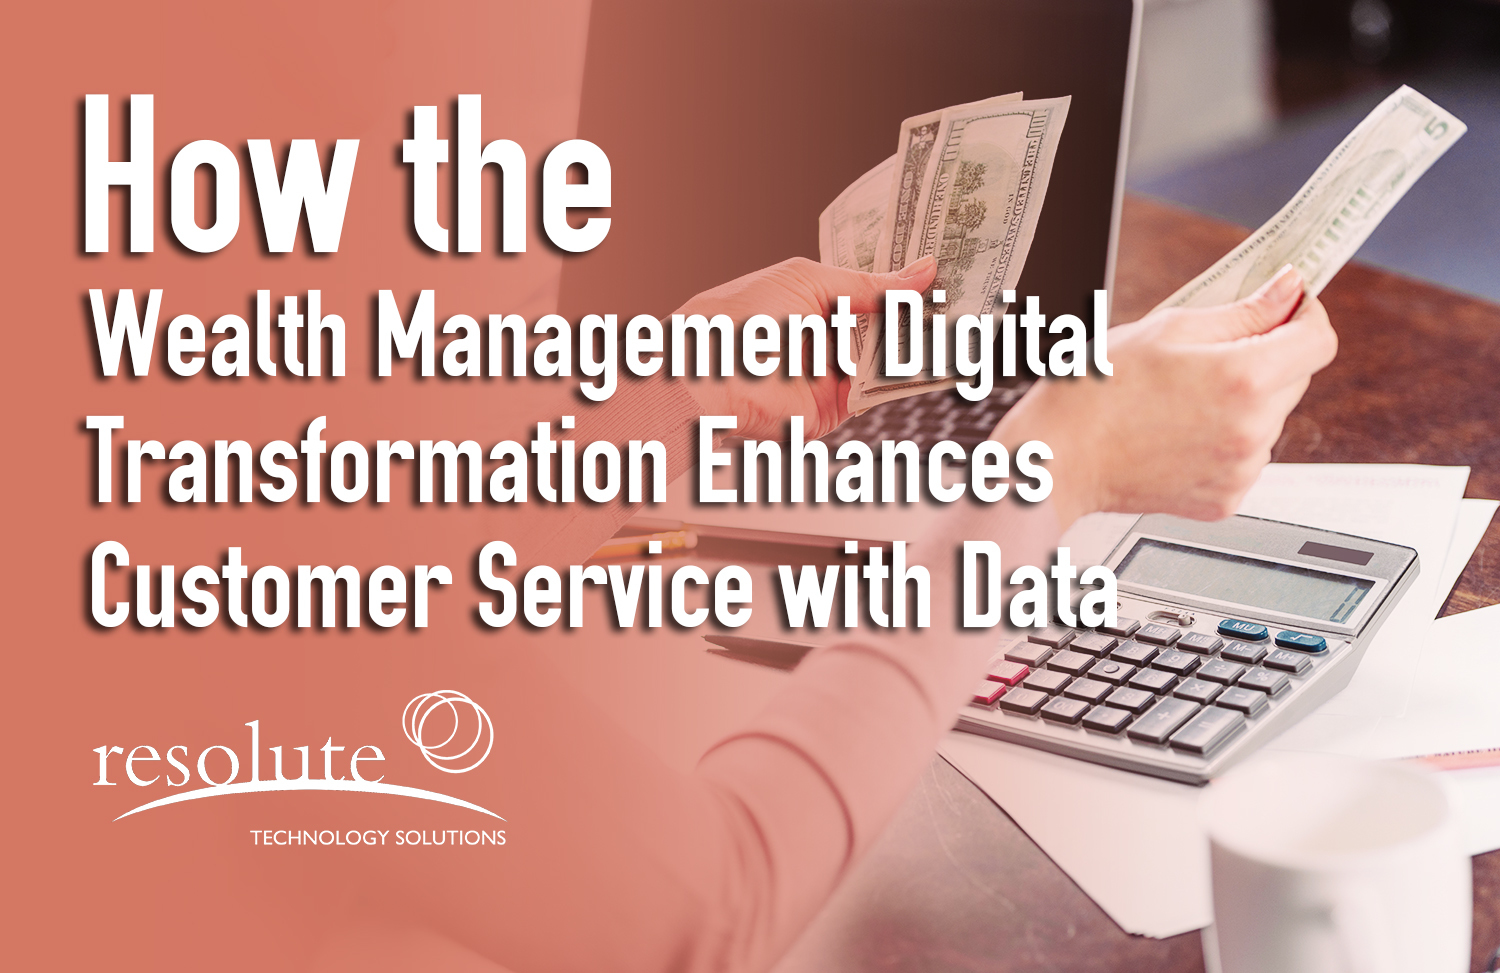 How the Wealth Management Digital Transformation Enhances Customer Service with Data